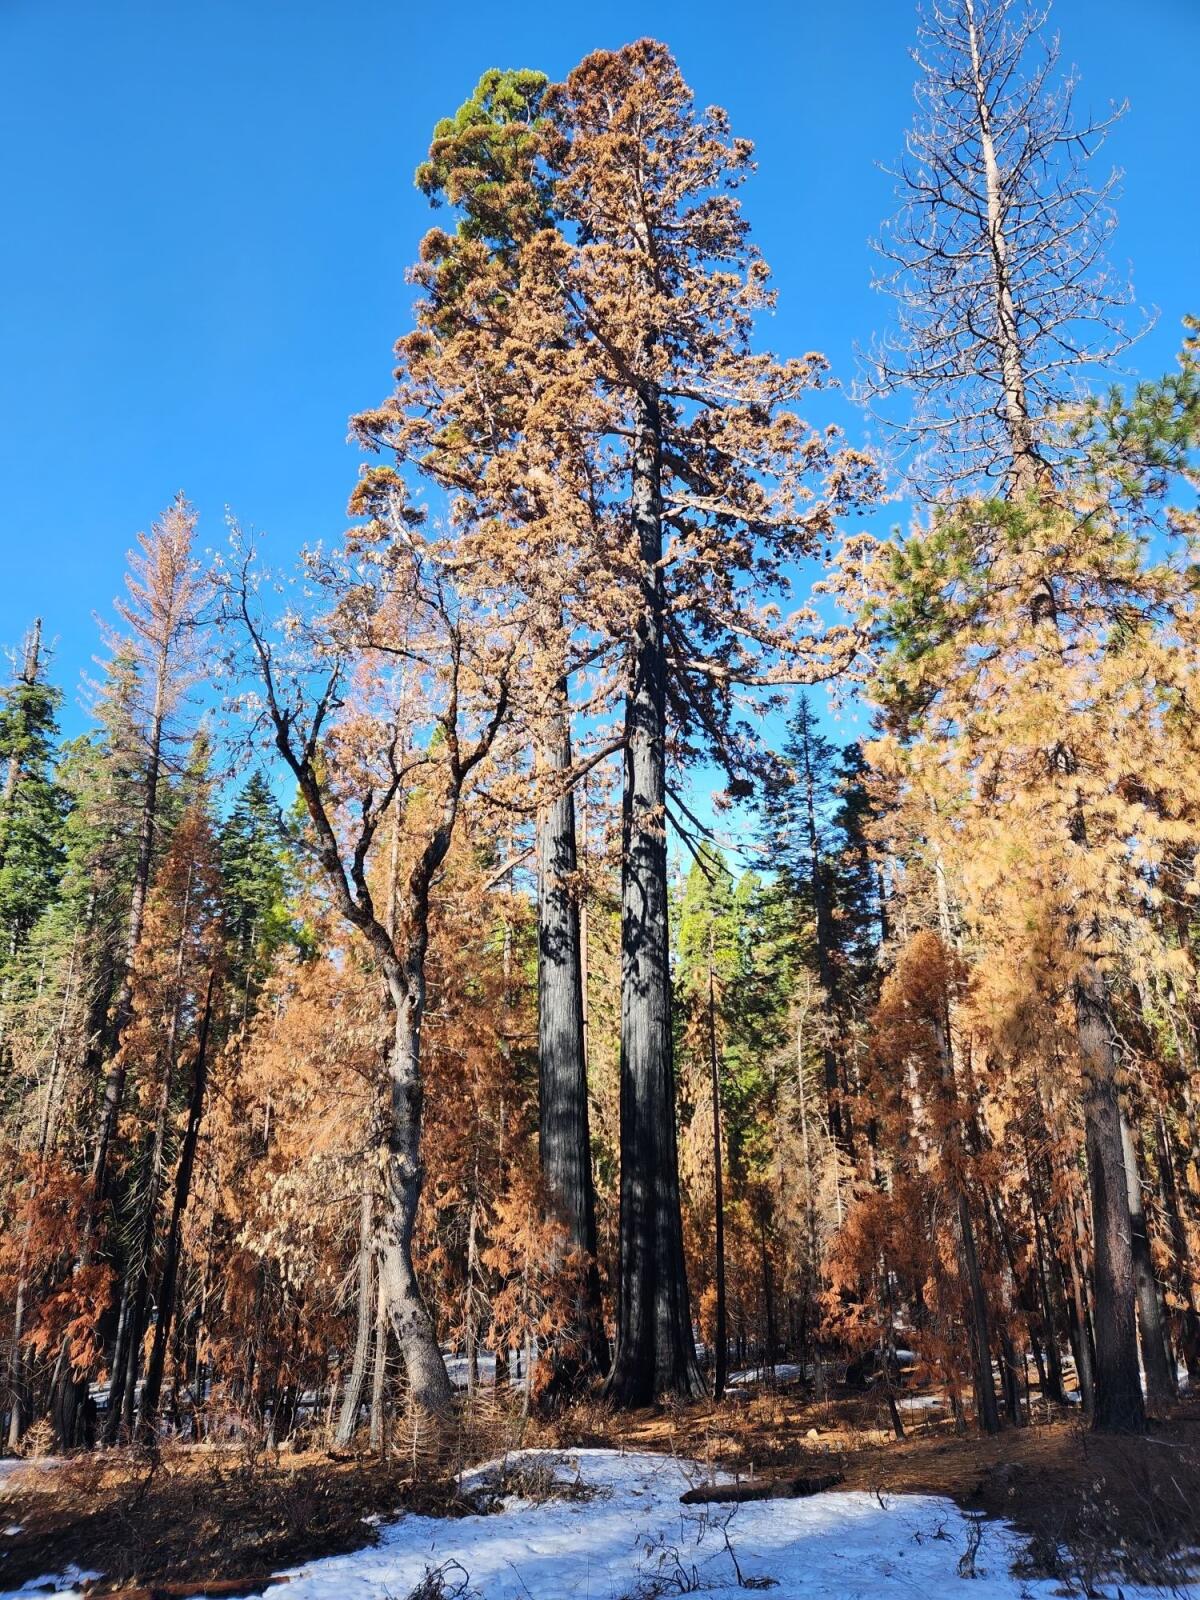 The Orphans, shown after the prescribed burn in Calaveras Big Trees State Park.